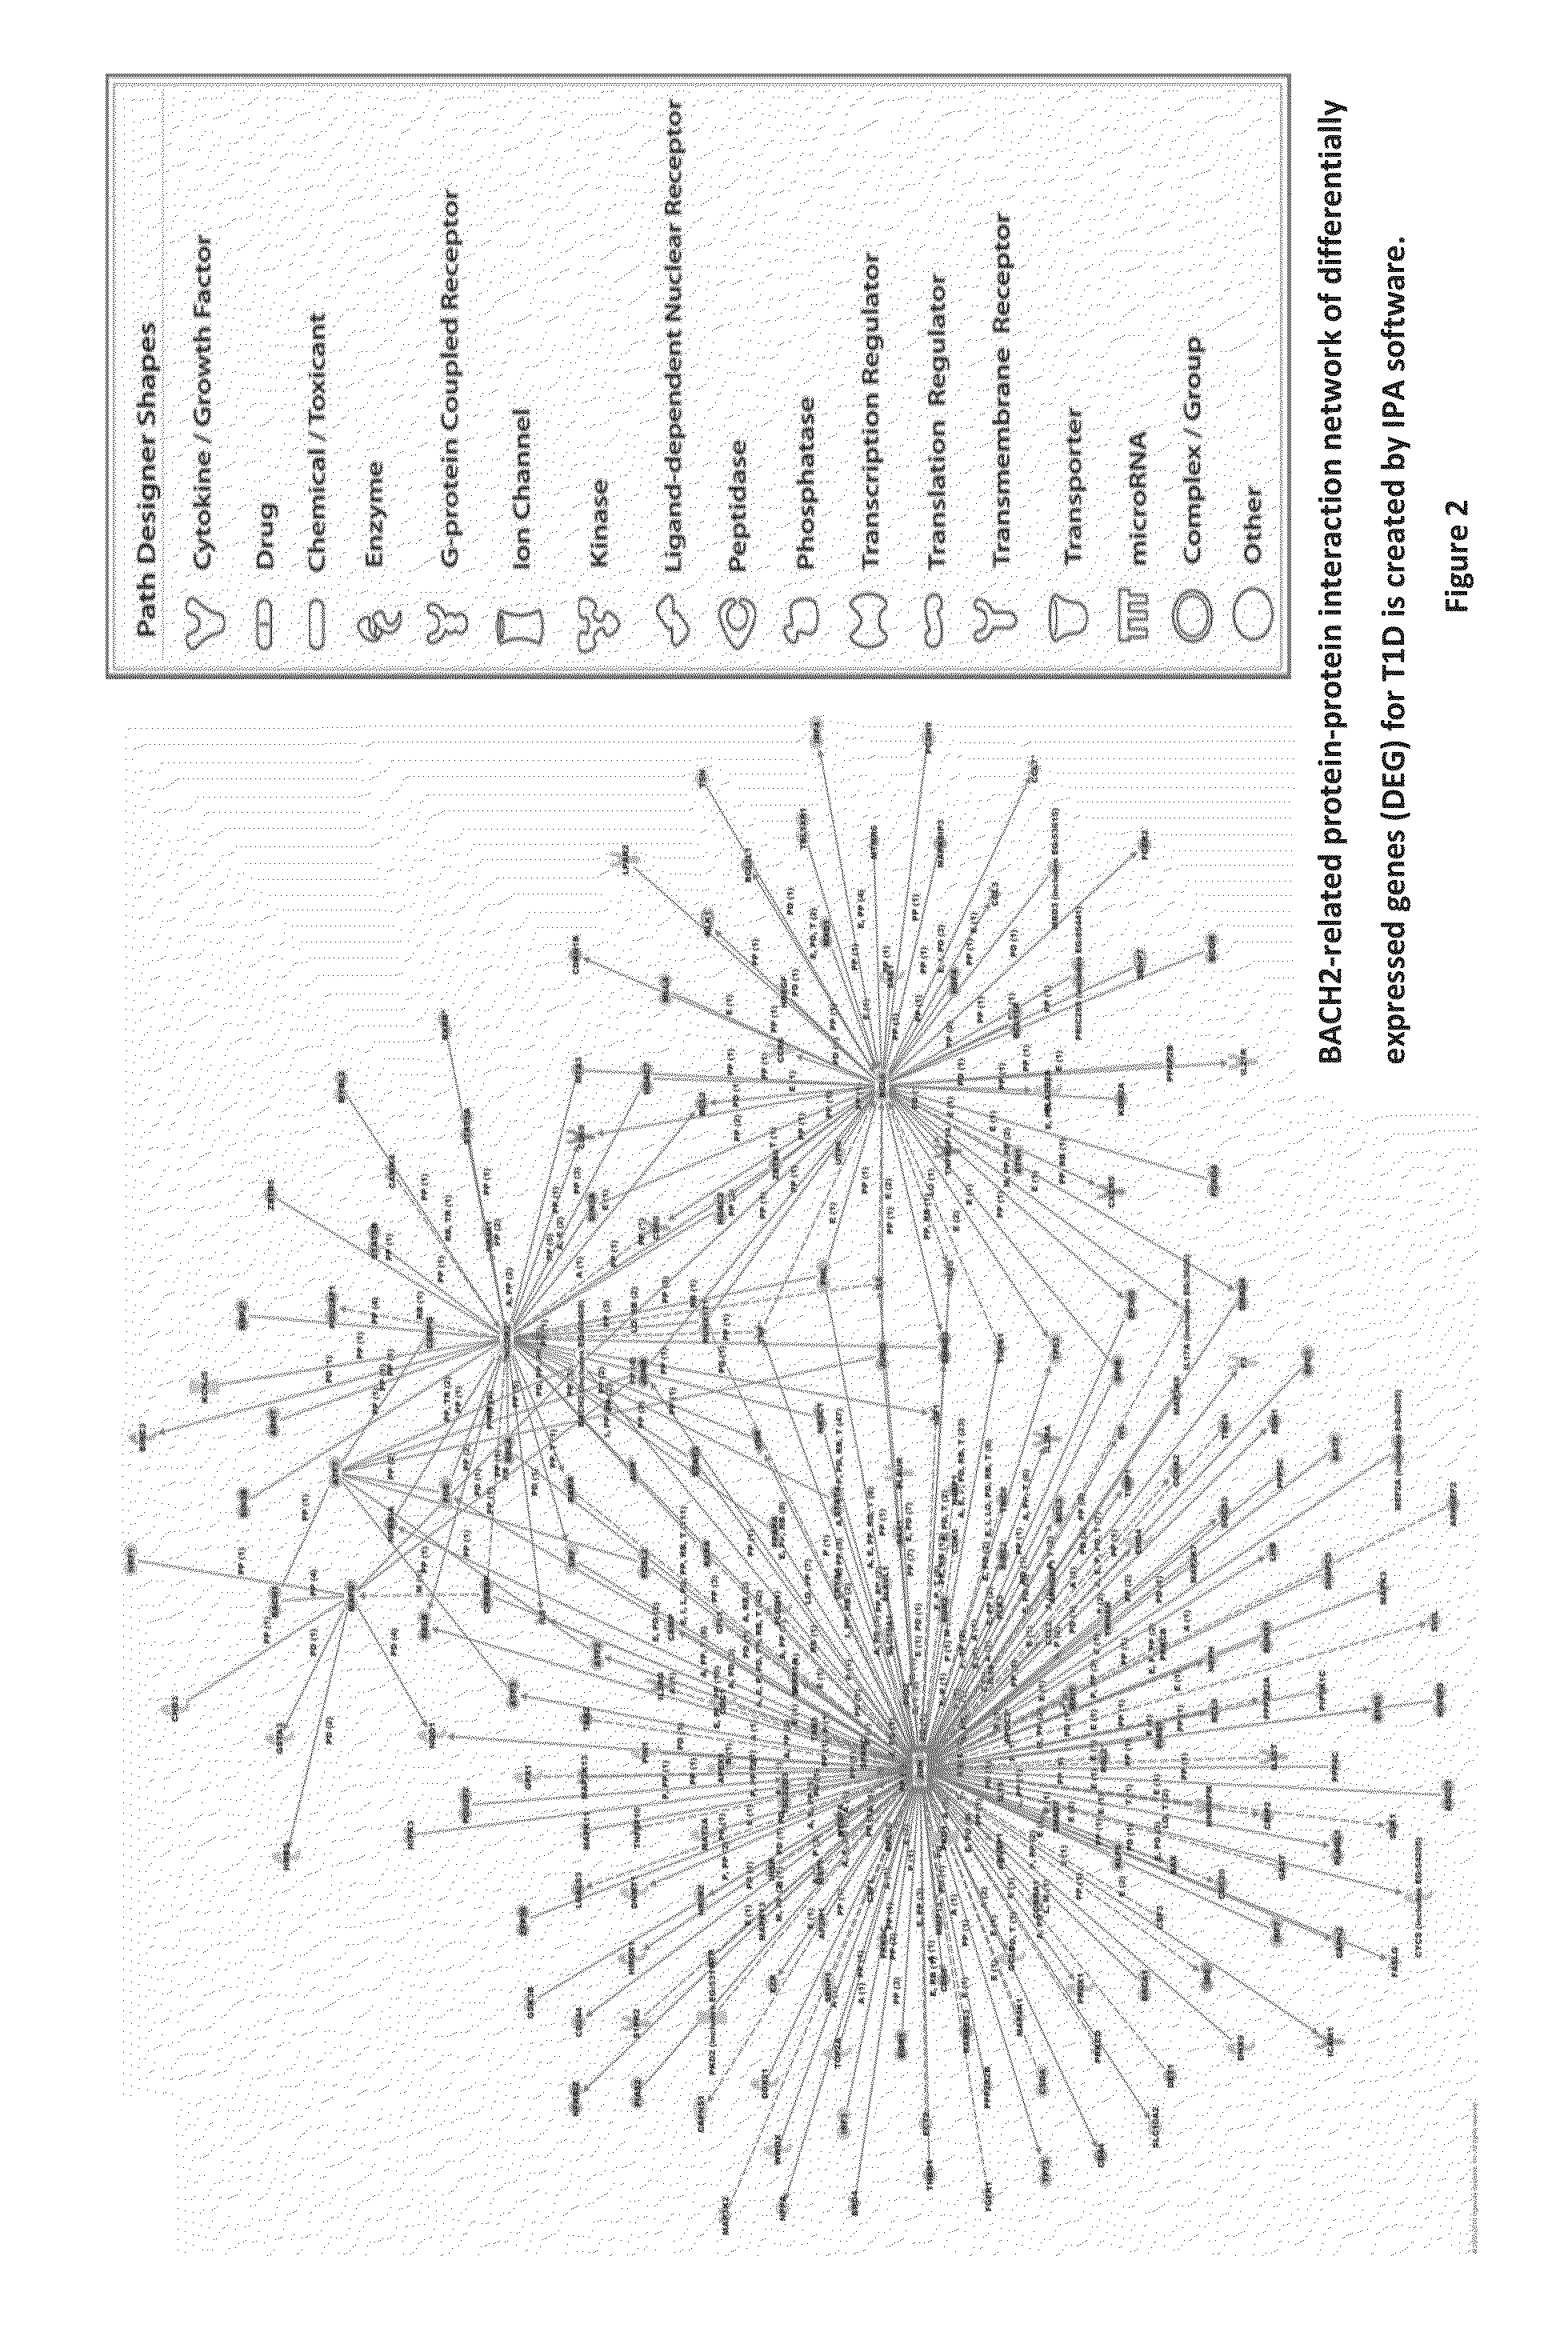 Genetic Alterations on Chromosomes 21Q, 6Q and 15Q and Methods of Use Thereof for the Diagnosis and Treatment of Type 1 Diabetes